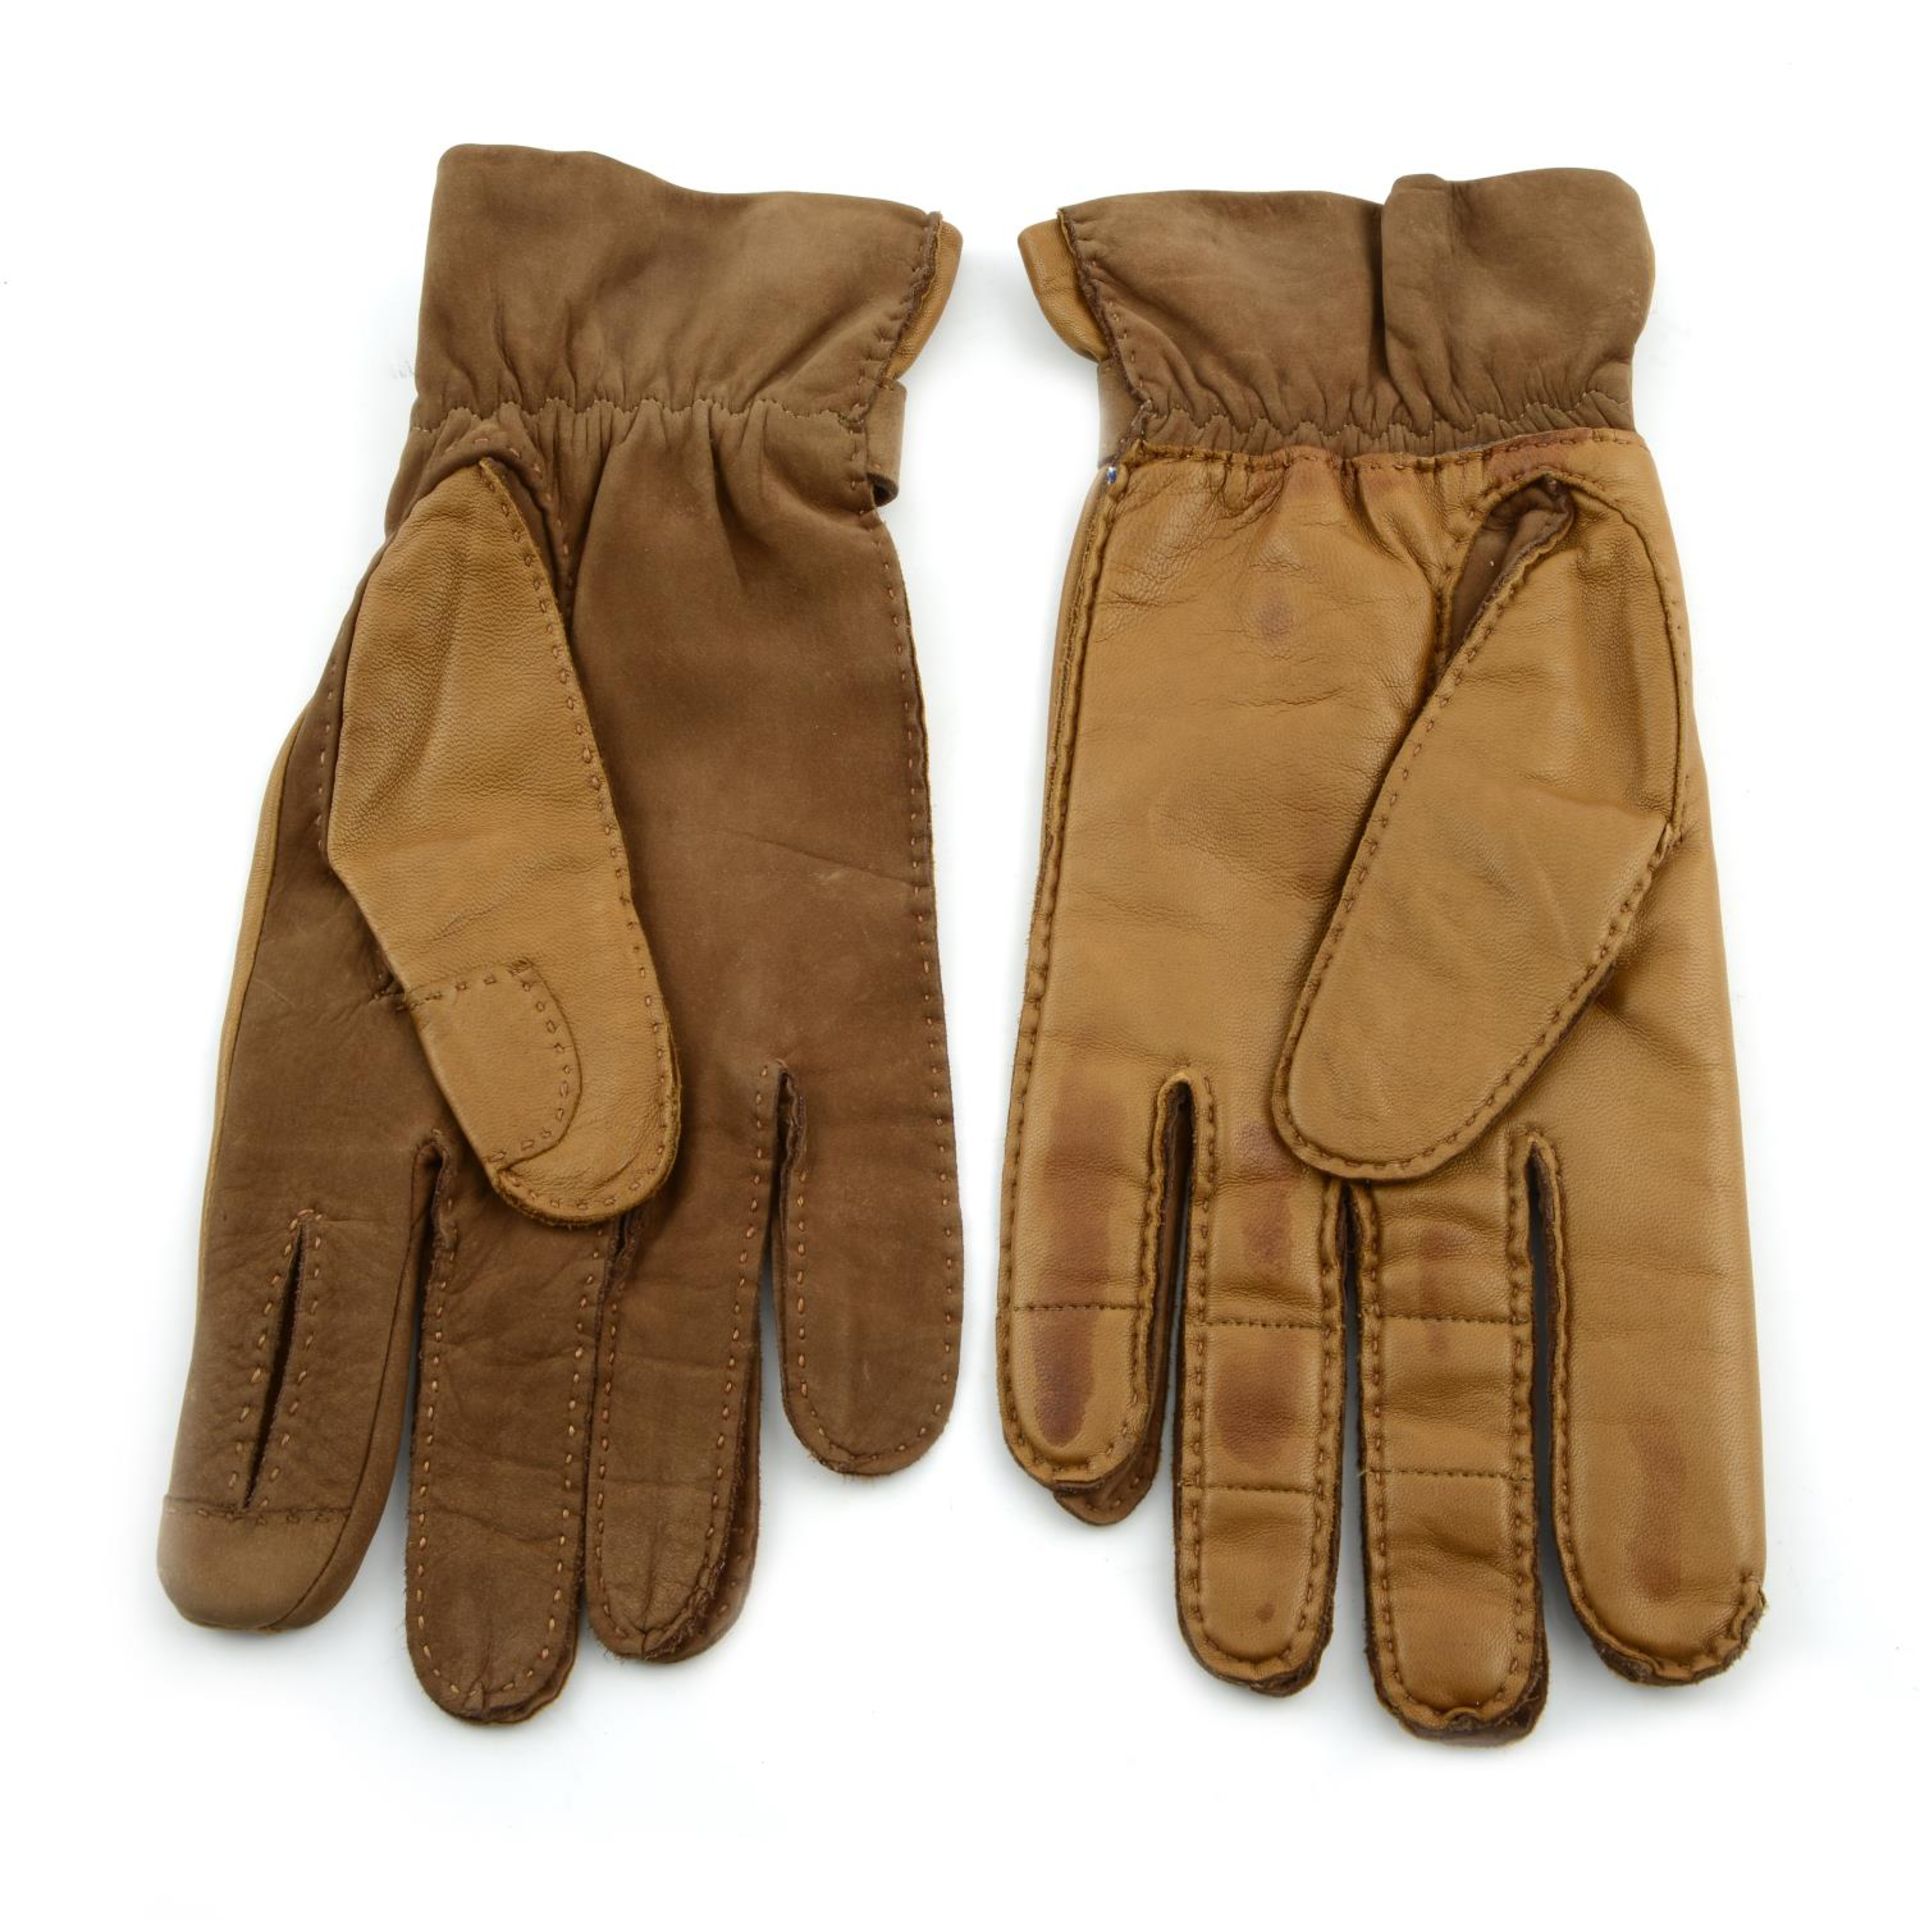 HOLLAND & HOLLAND - a pair of luxury leather hunting gloves. - Image 2 of 5